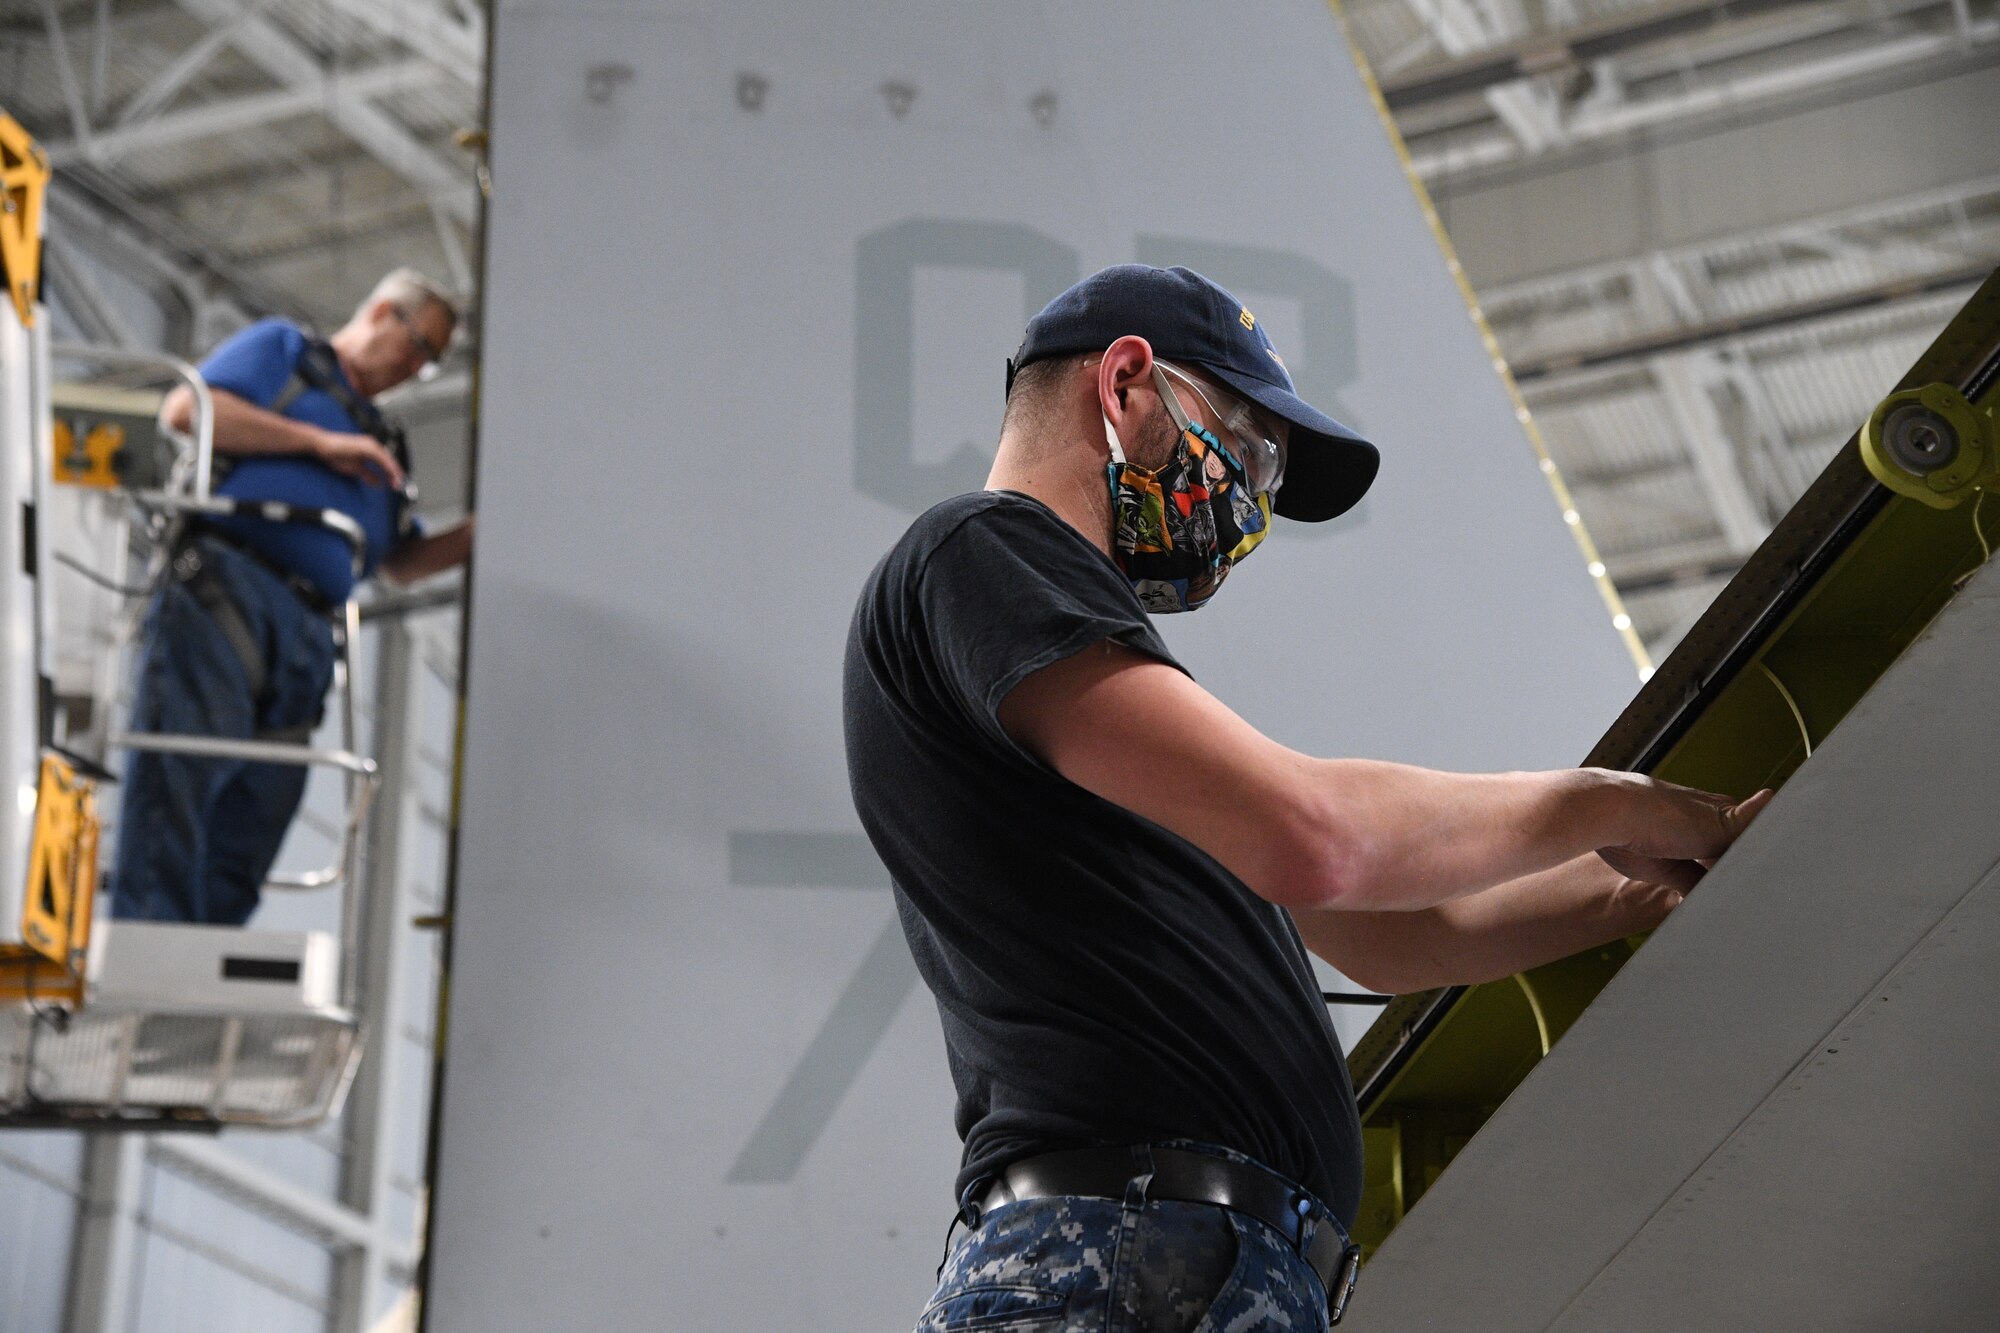 Jared Chidester, 309th Aircraft Maintenance Group aircraft mechanic, works on a C-130 at Hill Air Force Base, Utah, May 8, 2020. Comprised of seven maintenance squadrons and more than 2,000 personnel, the 309th AMXG performs depot maintenance, repair and overhaul on A-10, C-130, F-16, F-22, F-35 and T-38 airframes. (U.S. Air Force photo by R. Nial Bradshaw)